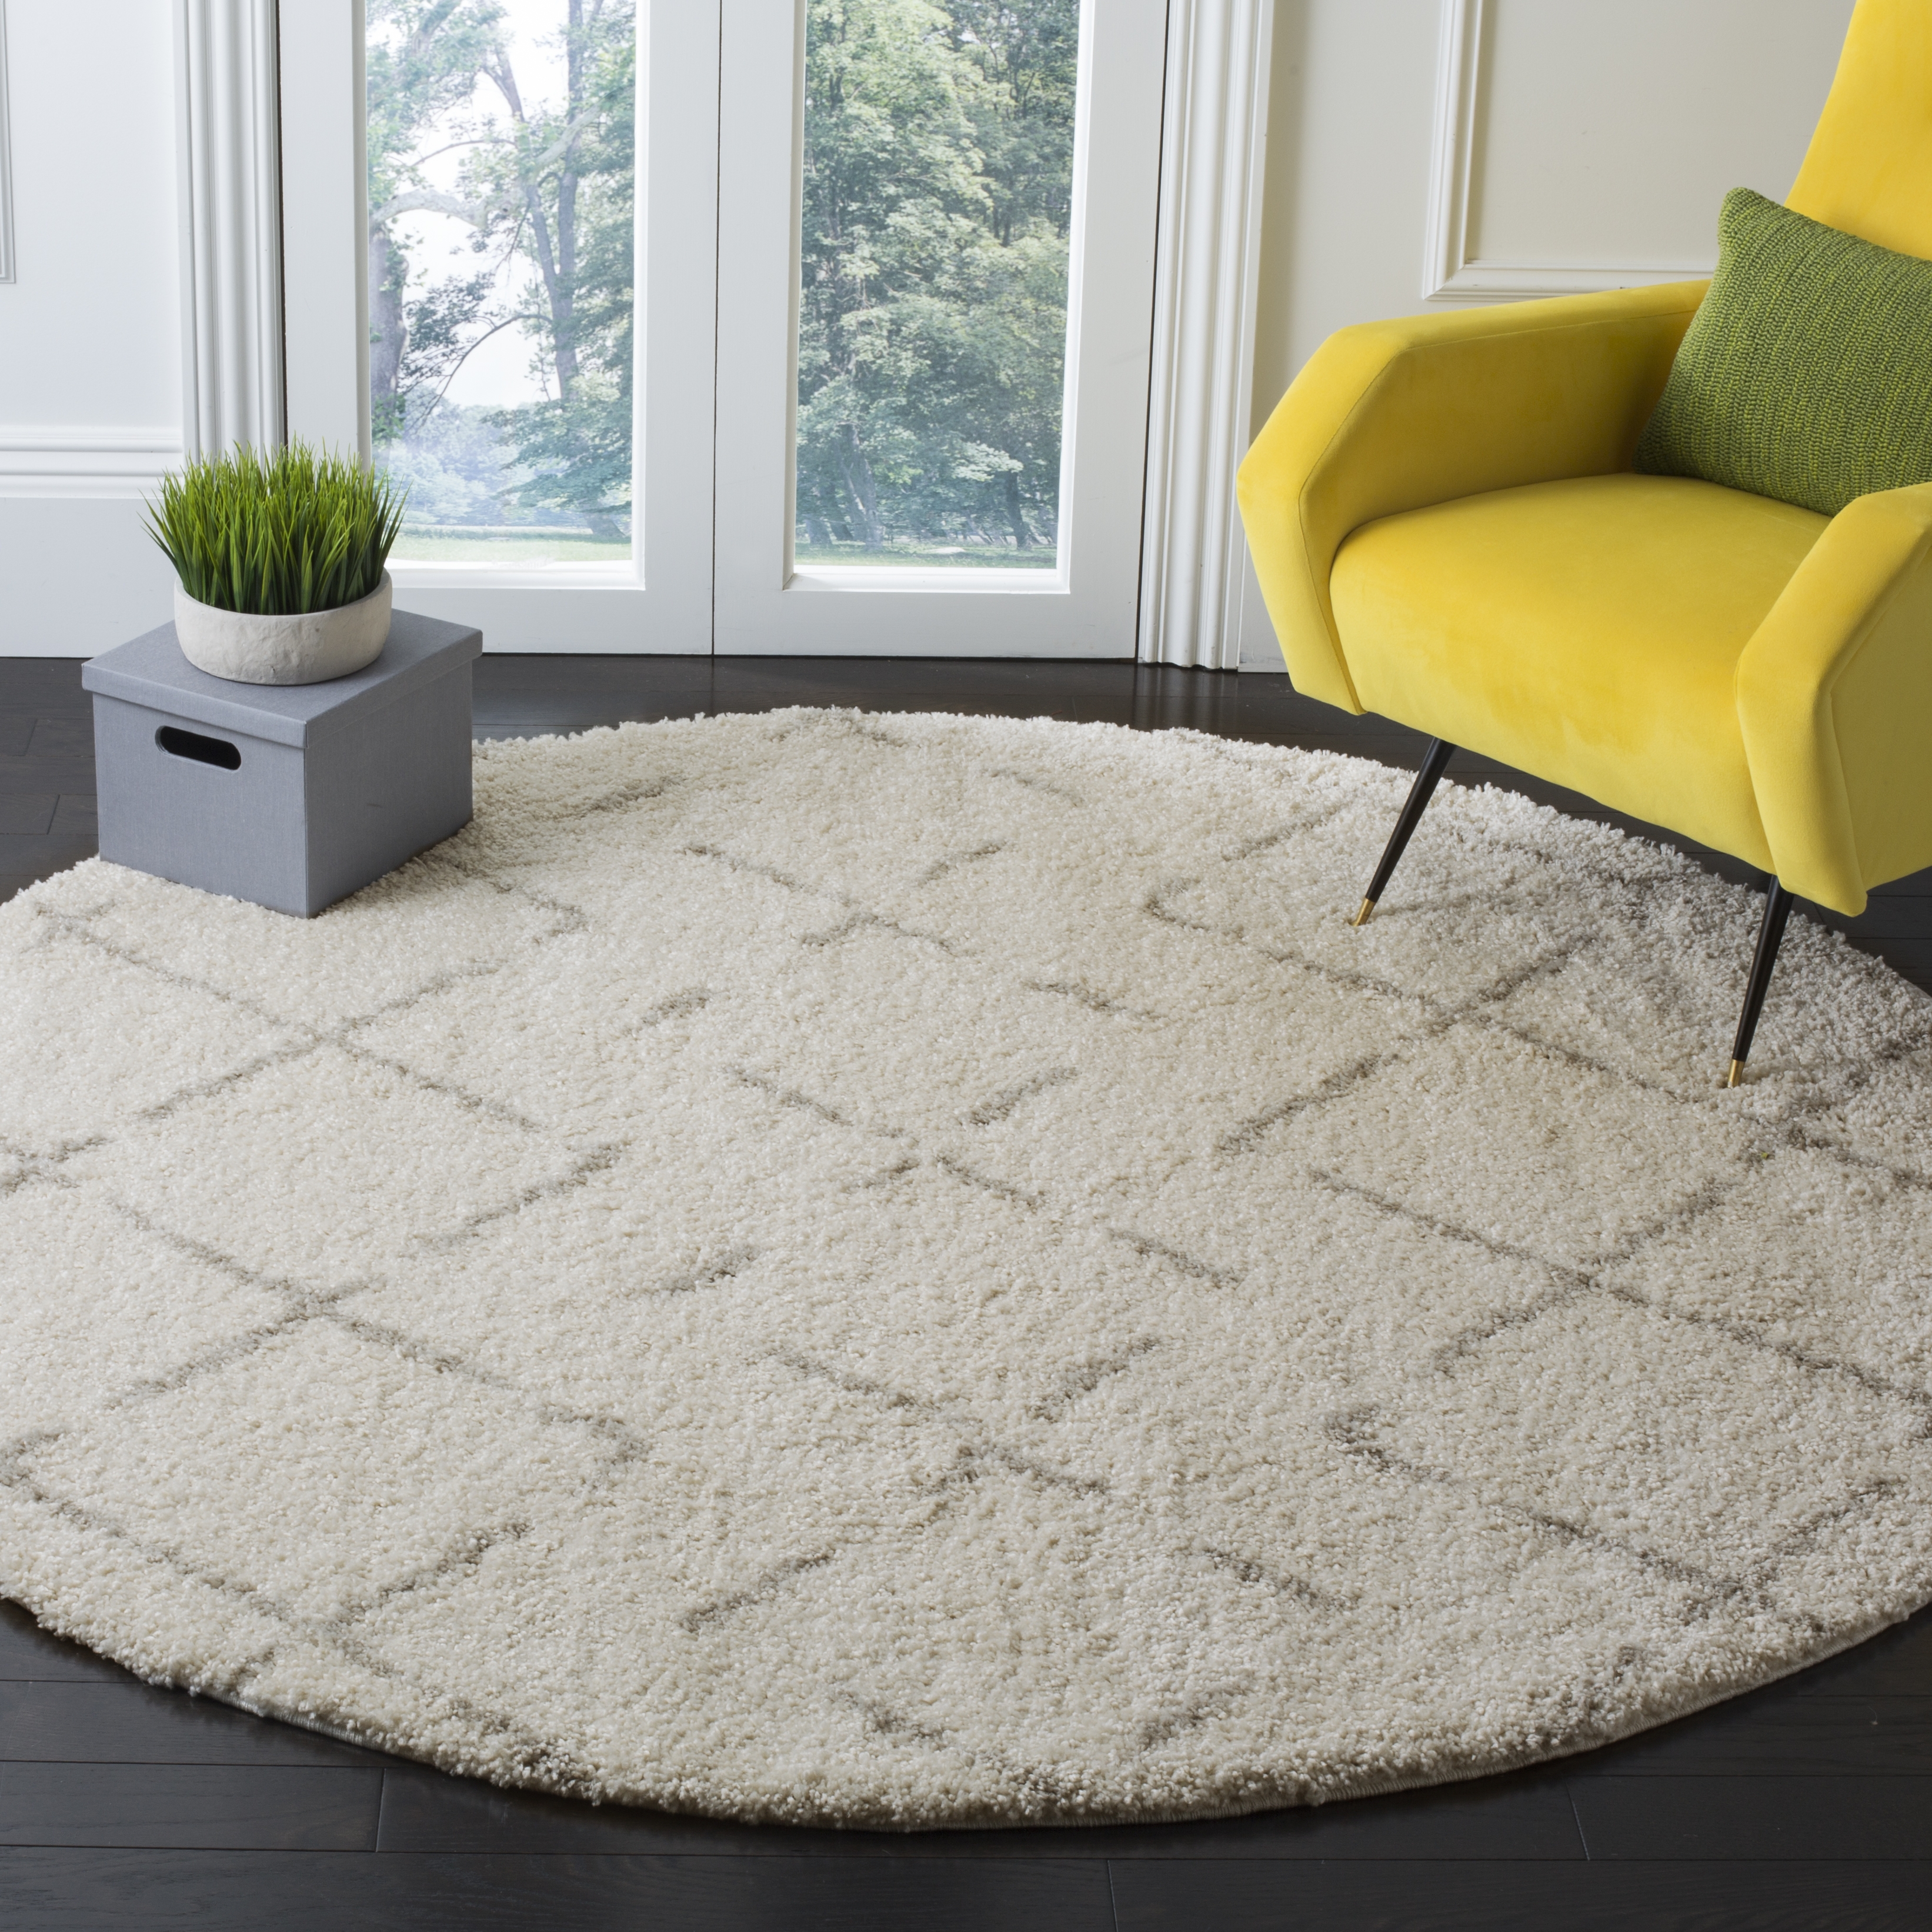 Arlo Home Woven Area Rug, ASG743A, Ivory/Beige,  6' 7" X 6' 7" Round - Image 1